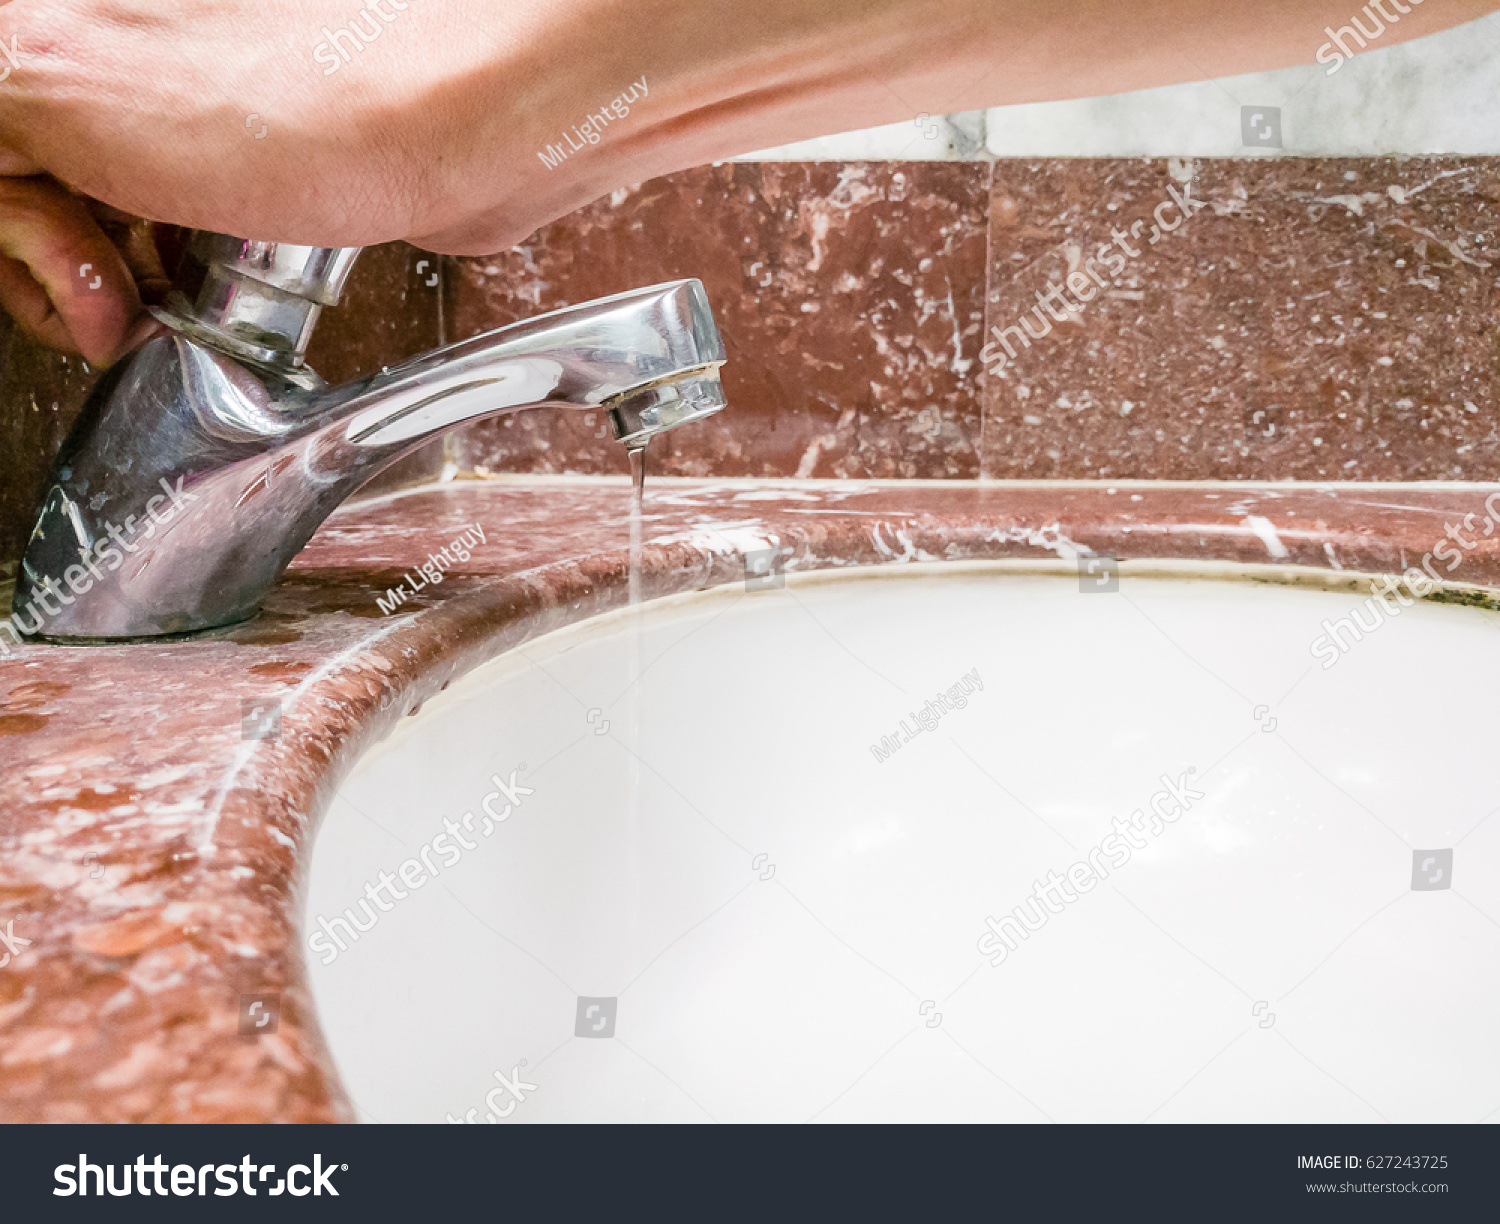 Using Faucet Clean Dirt People Healthcare Medical Stock Image